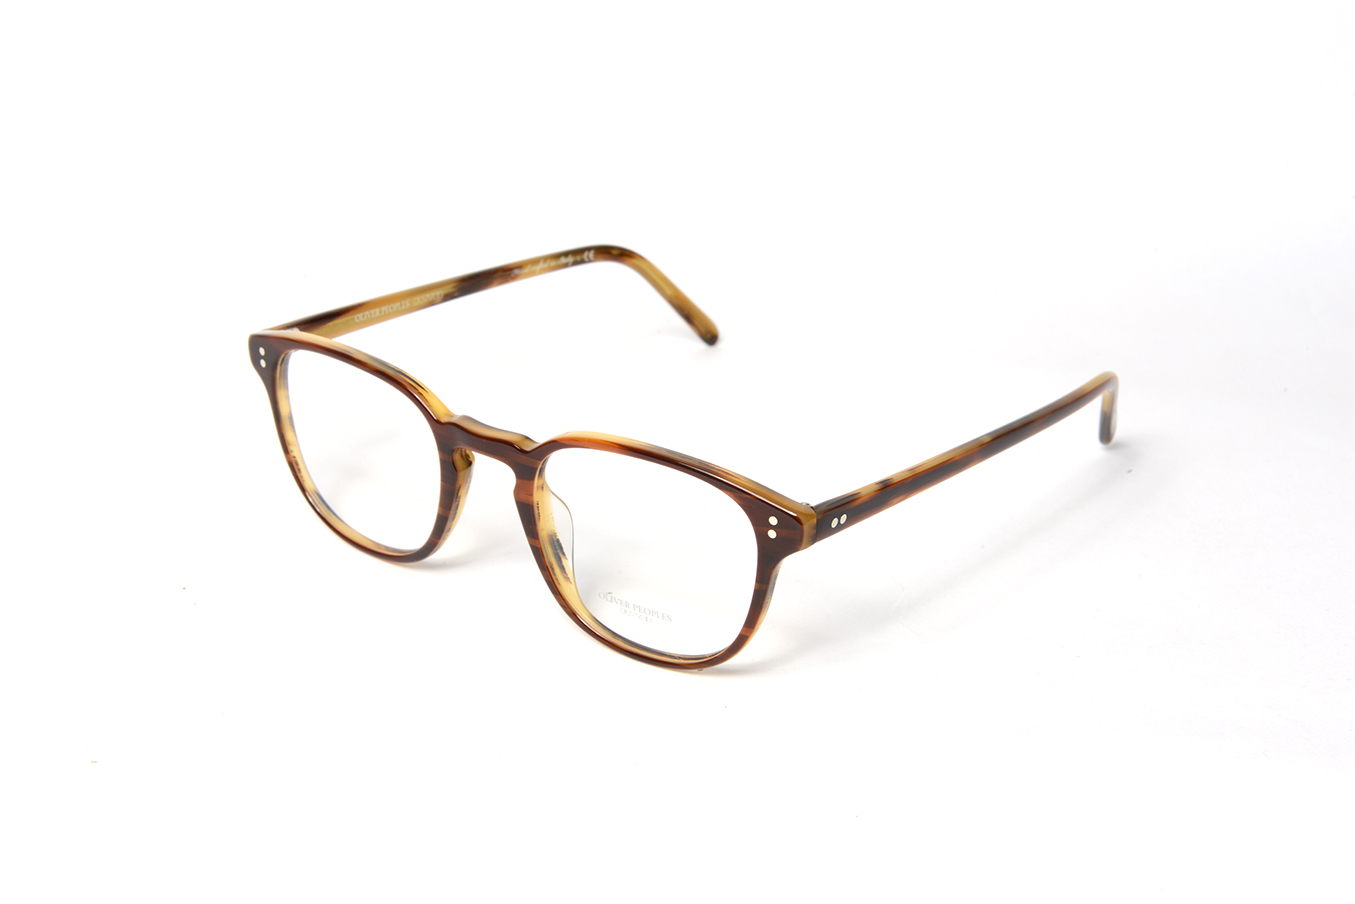 Oliver Peoples - Fairmont - Piccadilly Opticians Birmingham